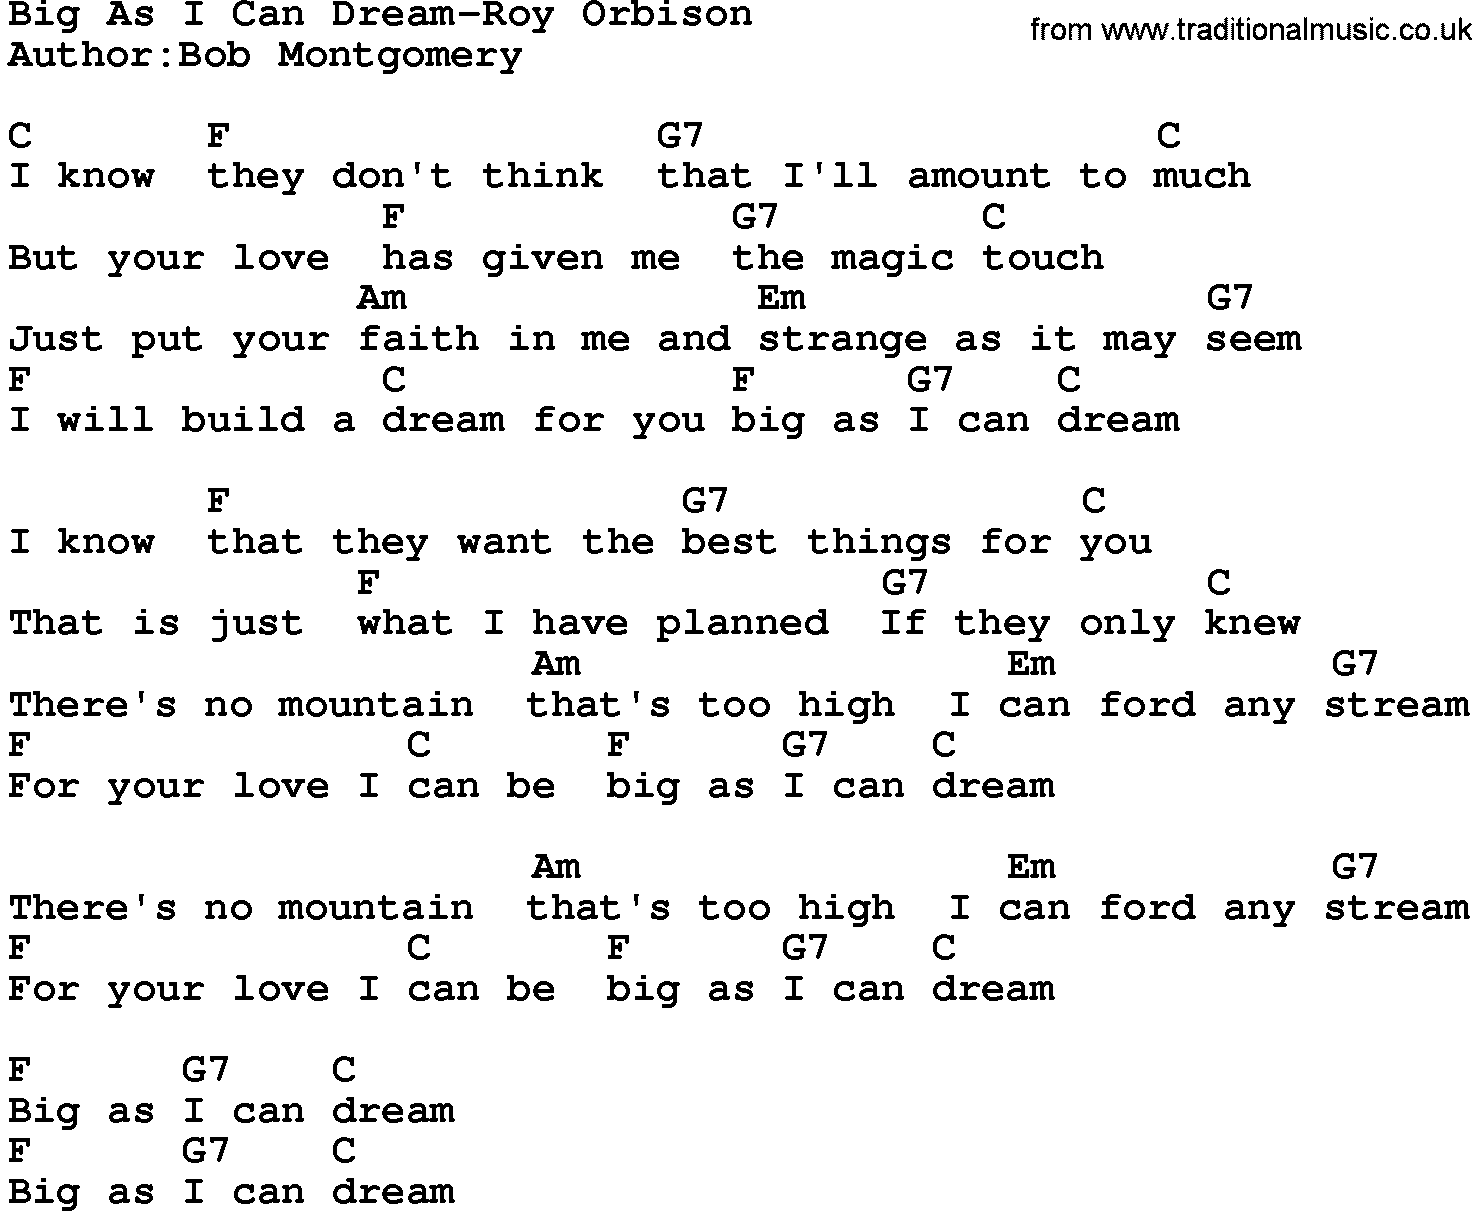 Country music song: Big As I Can Dream-Roy Orbison lyrics and chords